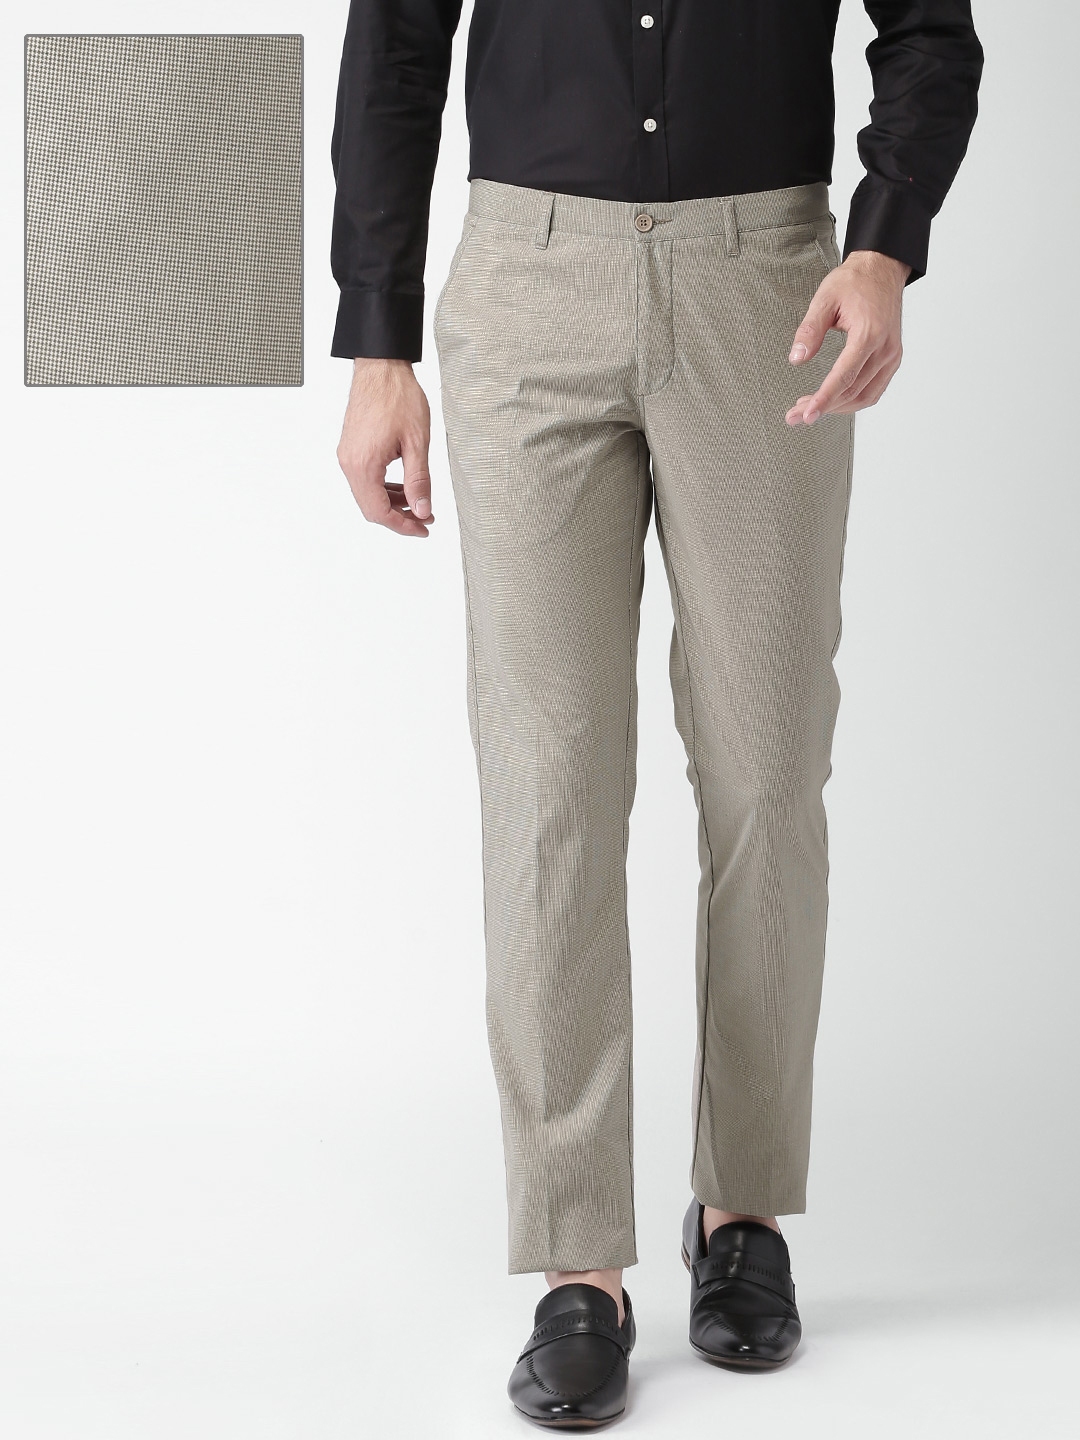 Buy INVICTUS Taupe Slim Fit Formal Trousers - Trousers for Men 1404253 ...